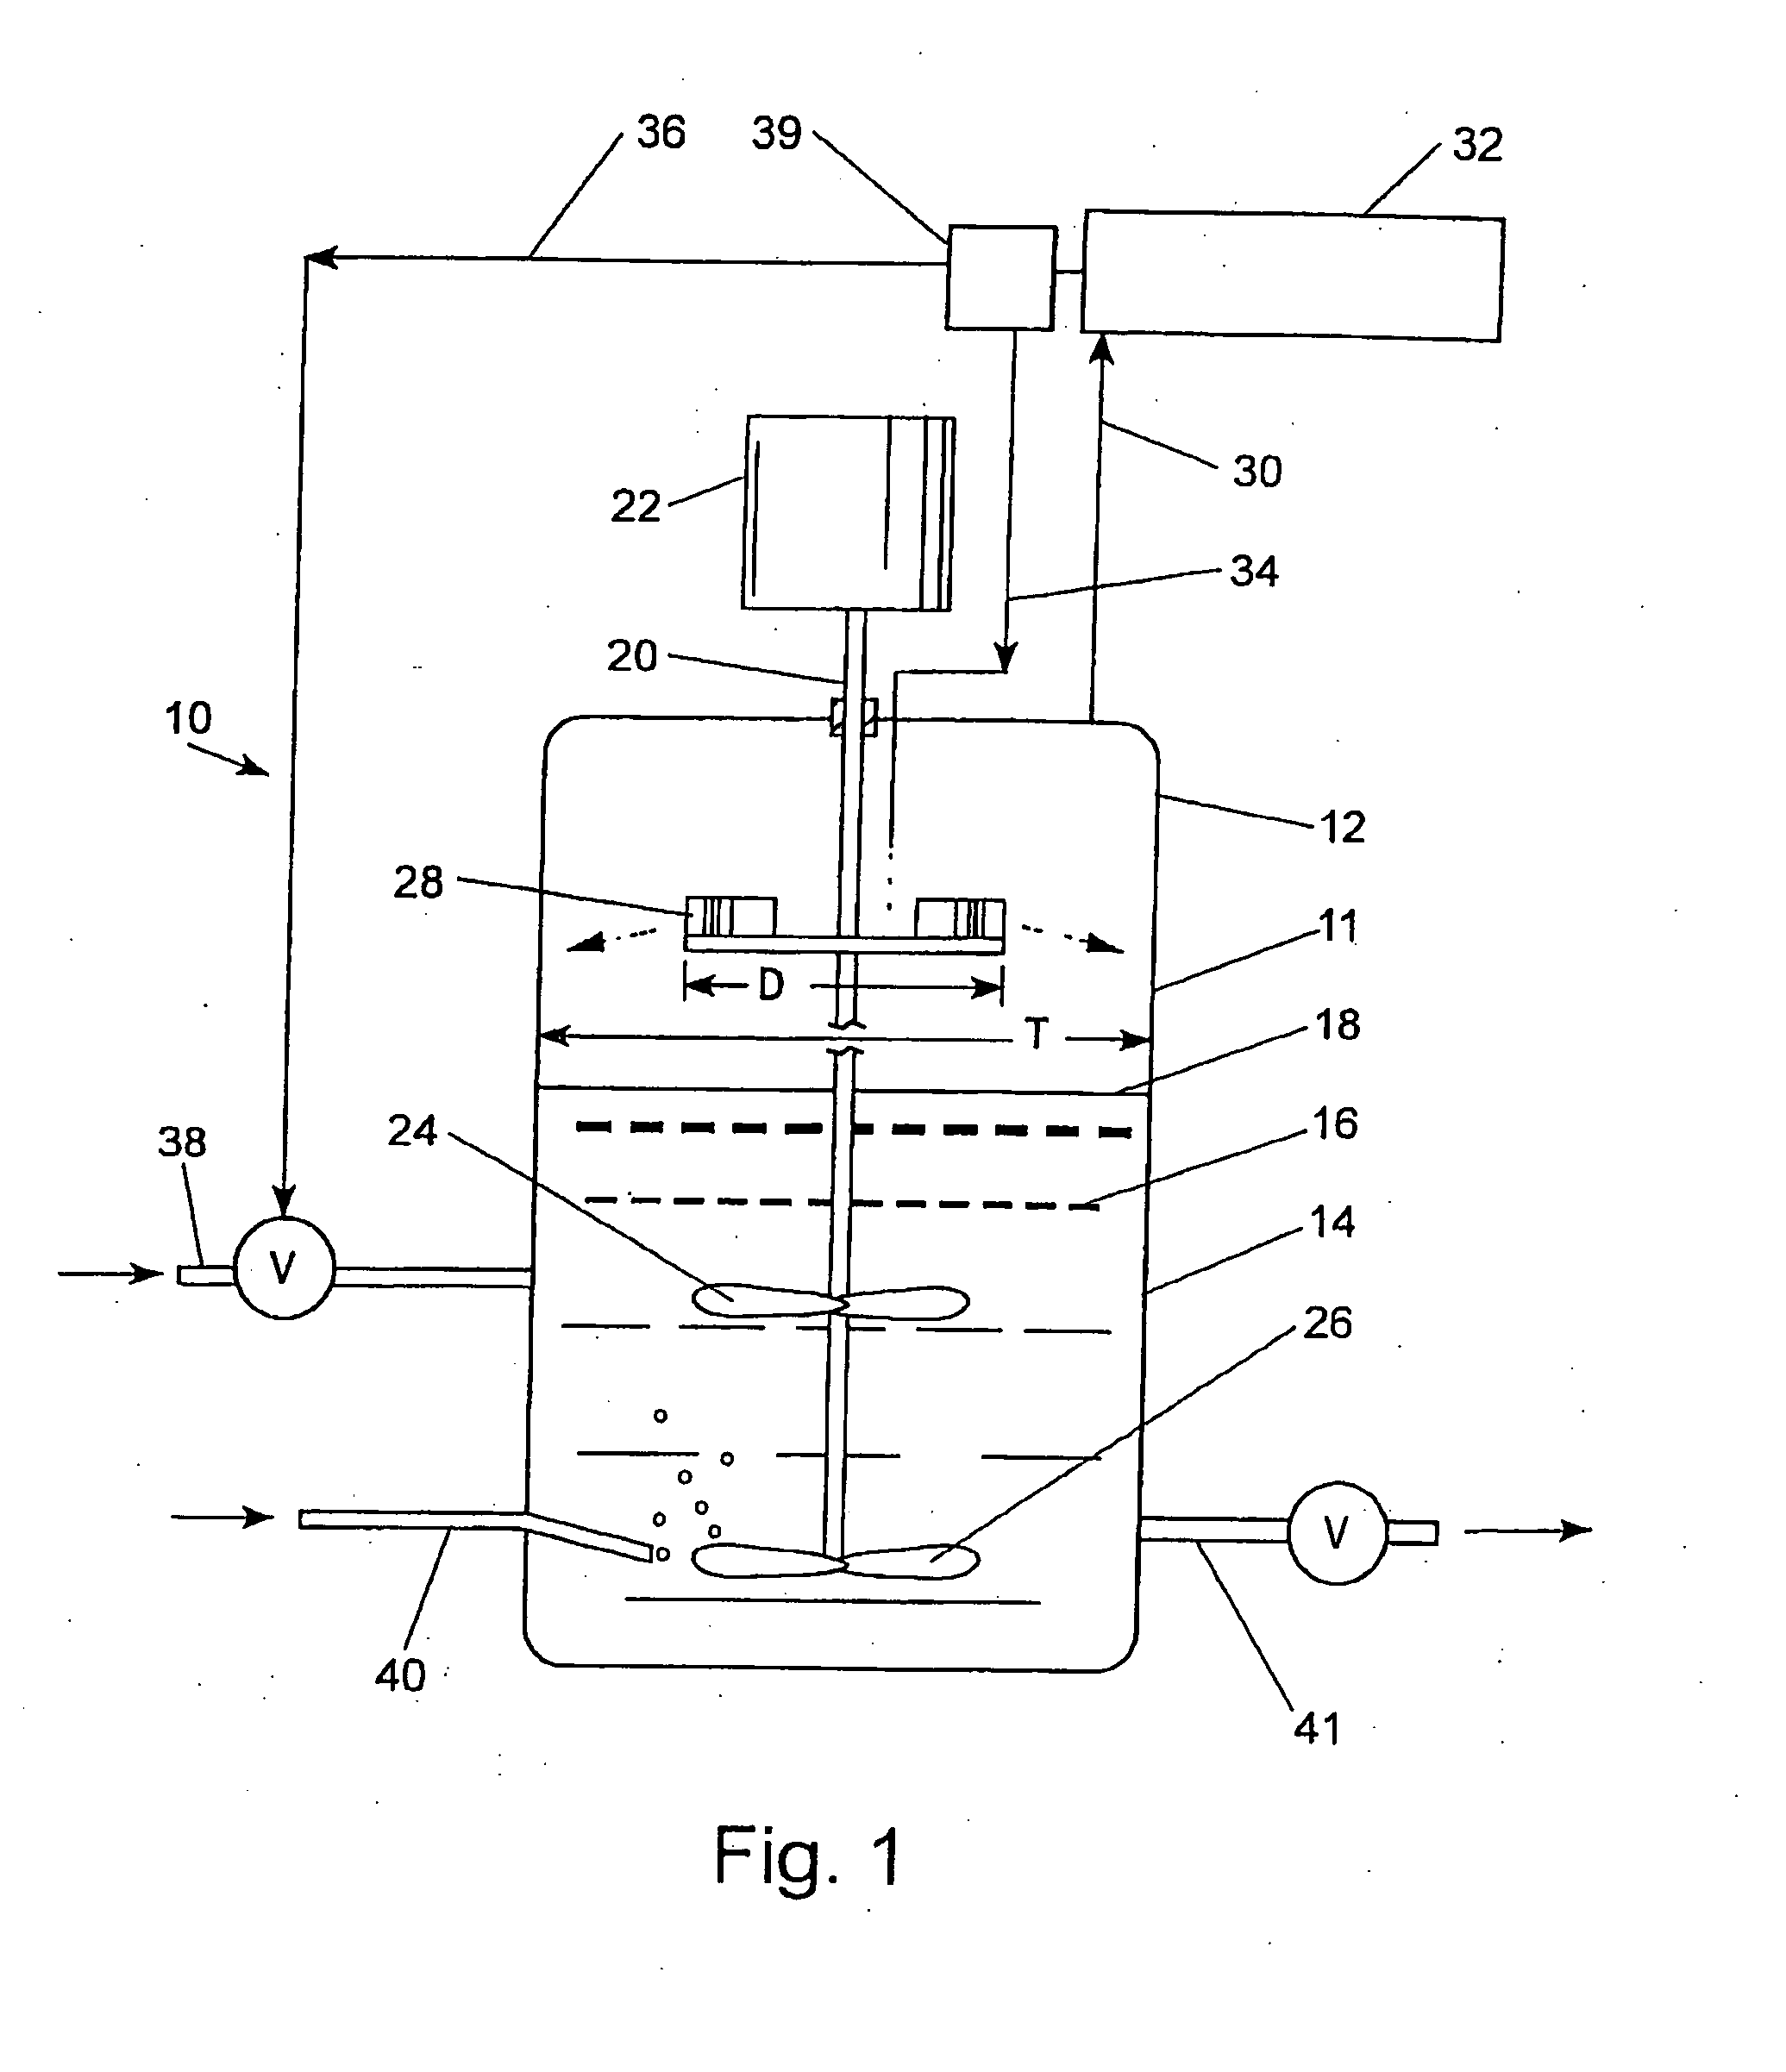 Liquid-gas phase reactor system